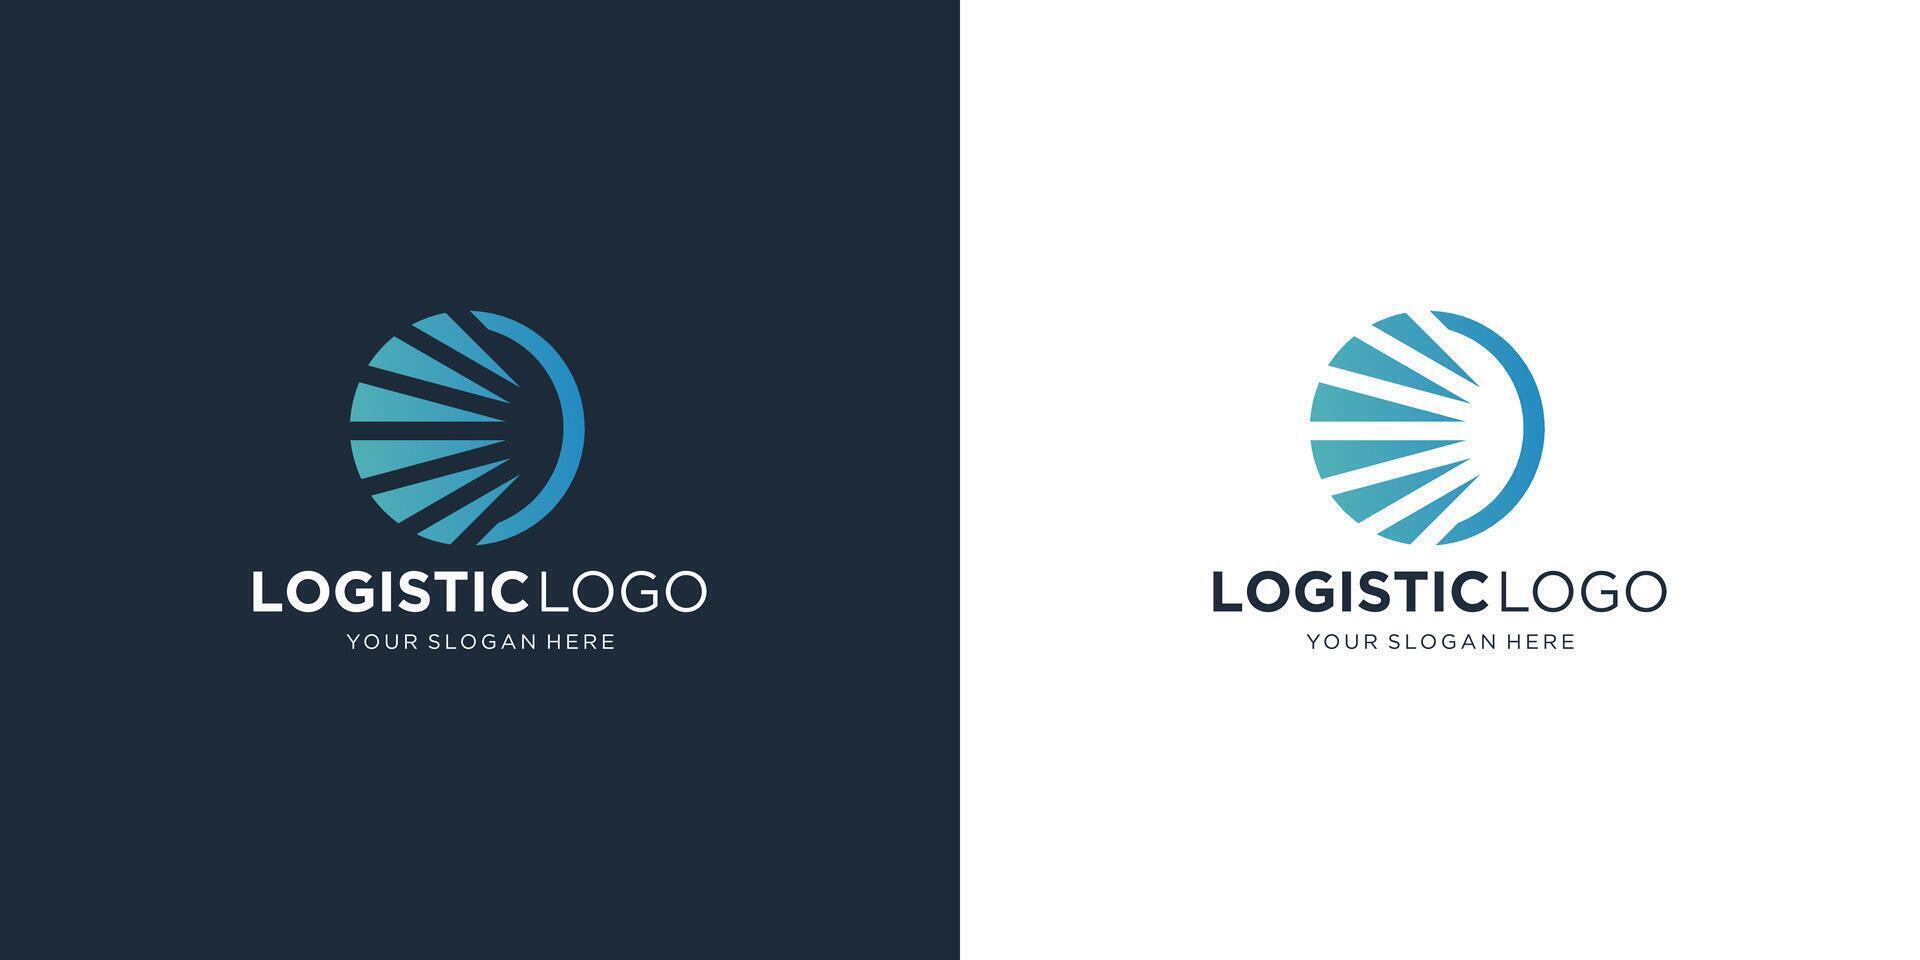 Logo for logistics and delivery company. right Arrow with negative space shape design. vector